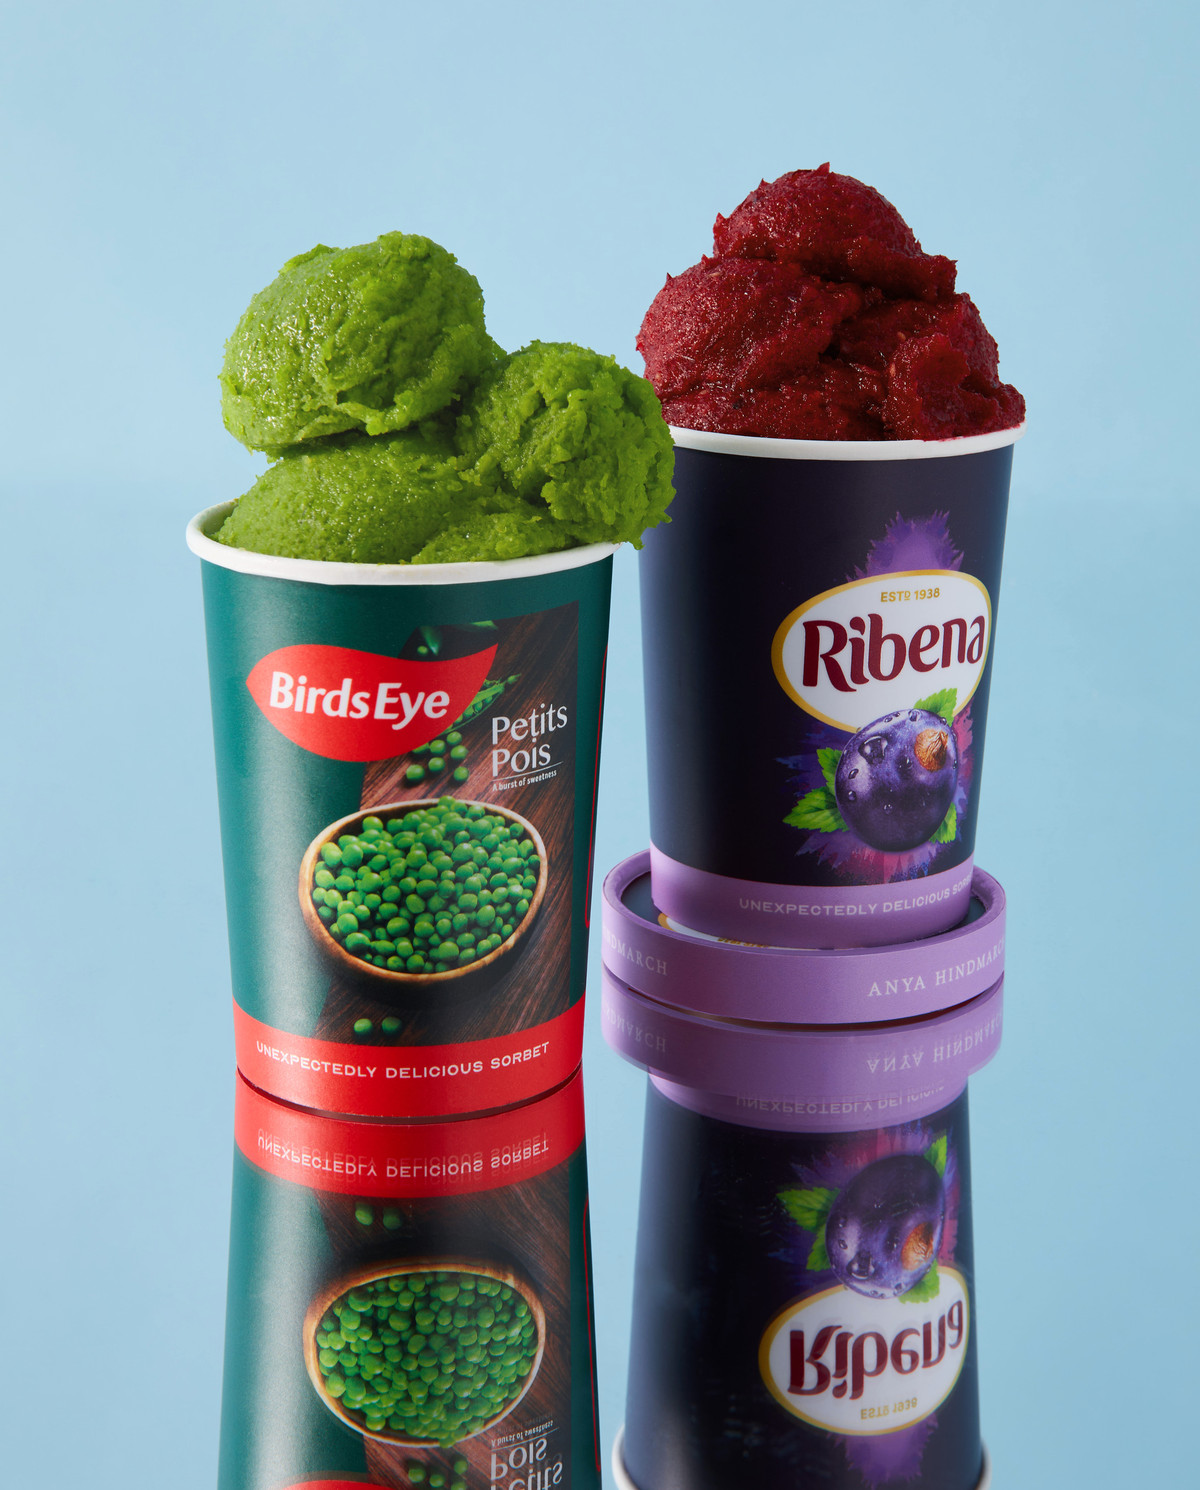 Cartons of green and purple ice cream branded respectively with Birds Eye and Ribena respecitively.